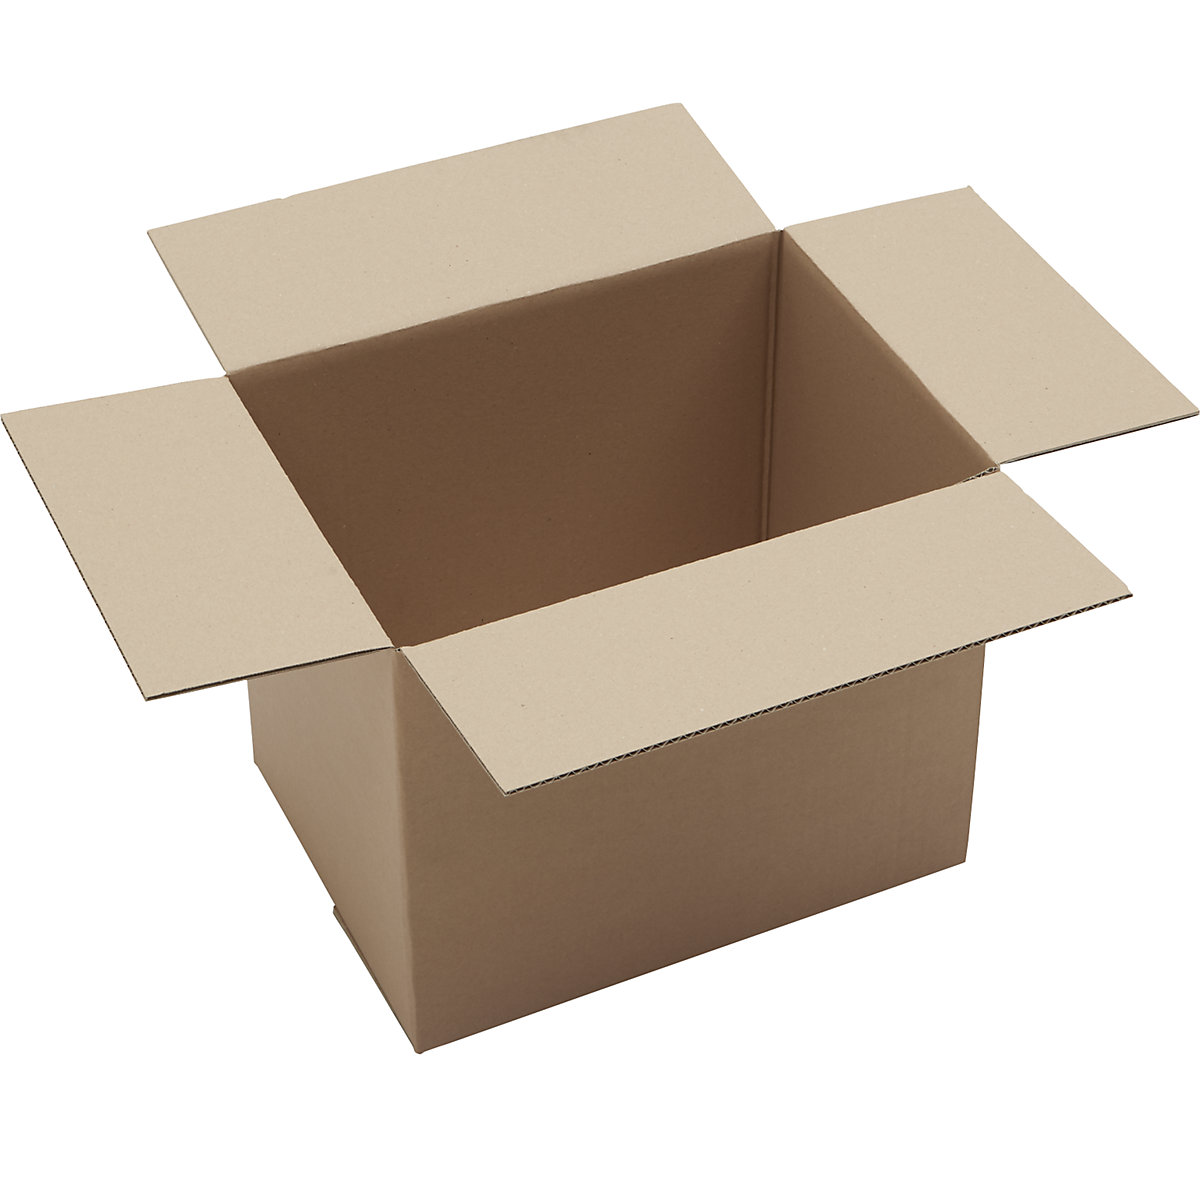 Corrugated cardboard folding boxes, FEFCO 0201, single fluted, pack of 50, internal dimensions 375 x 275 x 300 mm-12